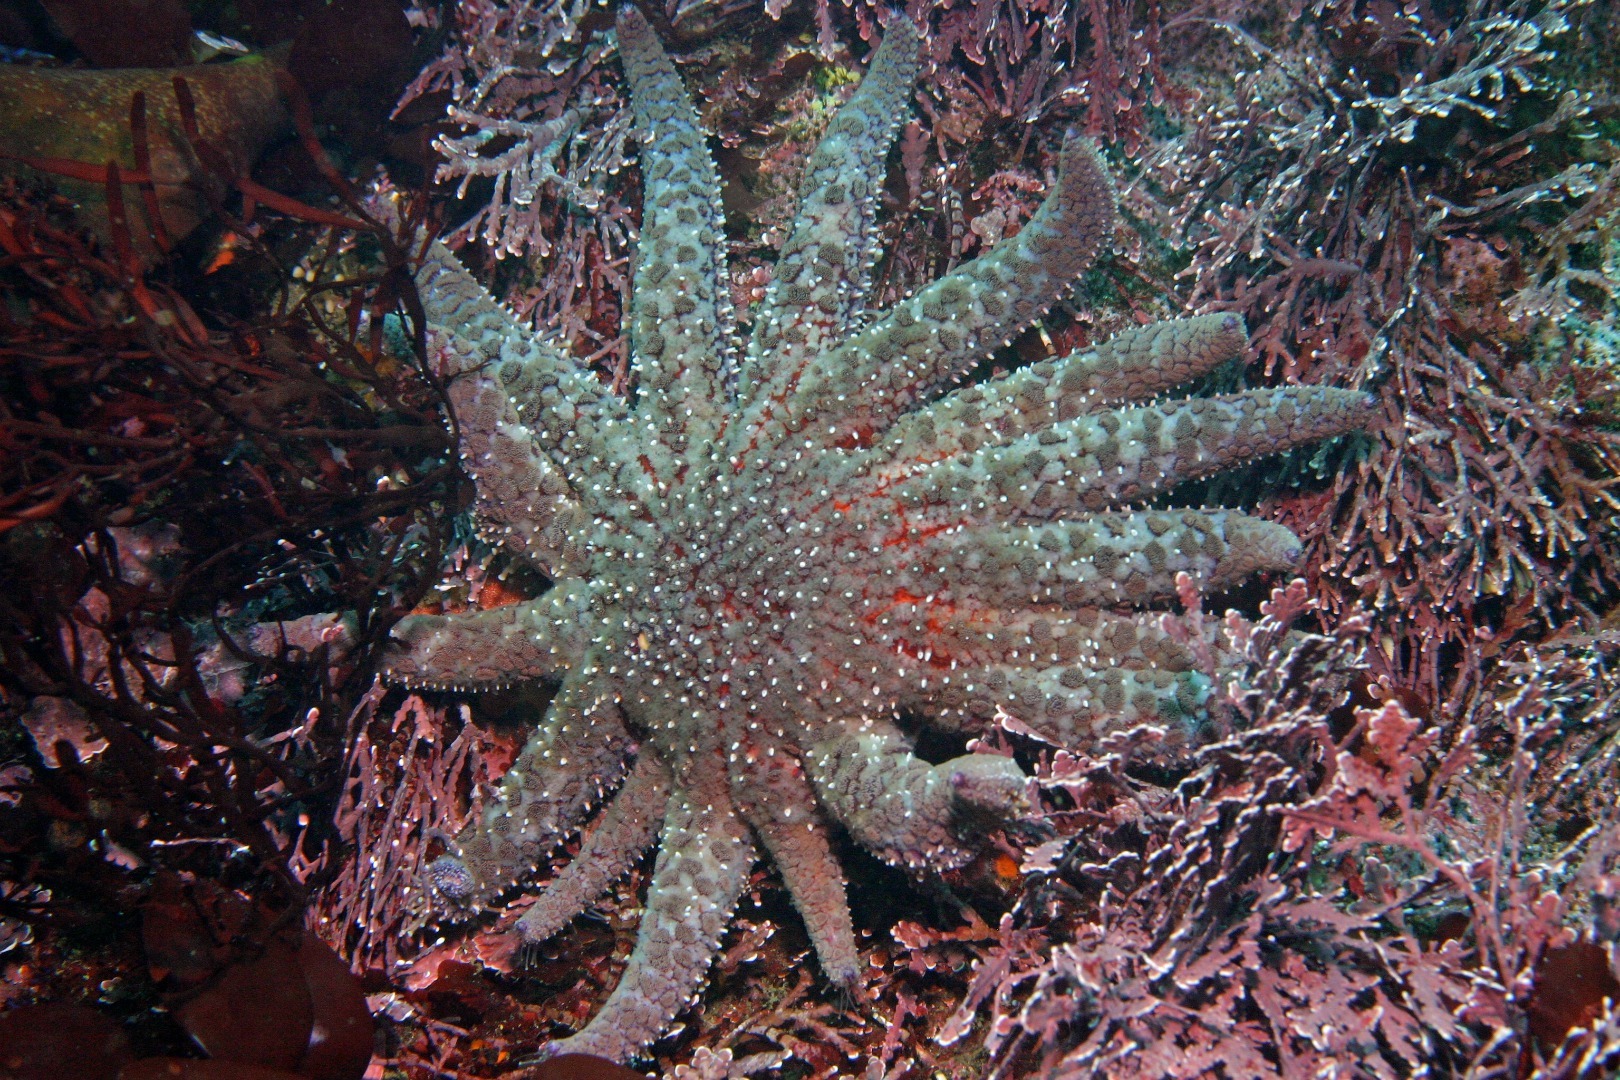 a large purple sea star with 15 legs